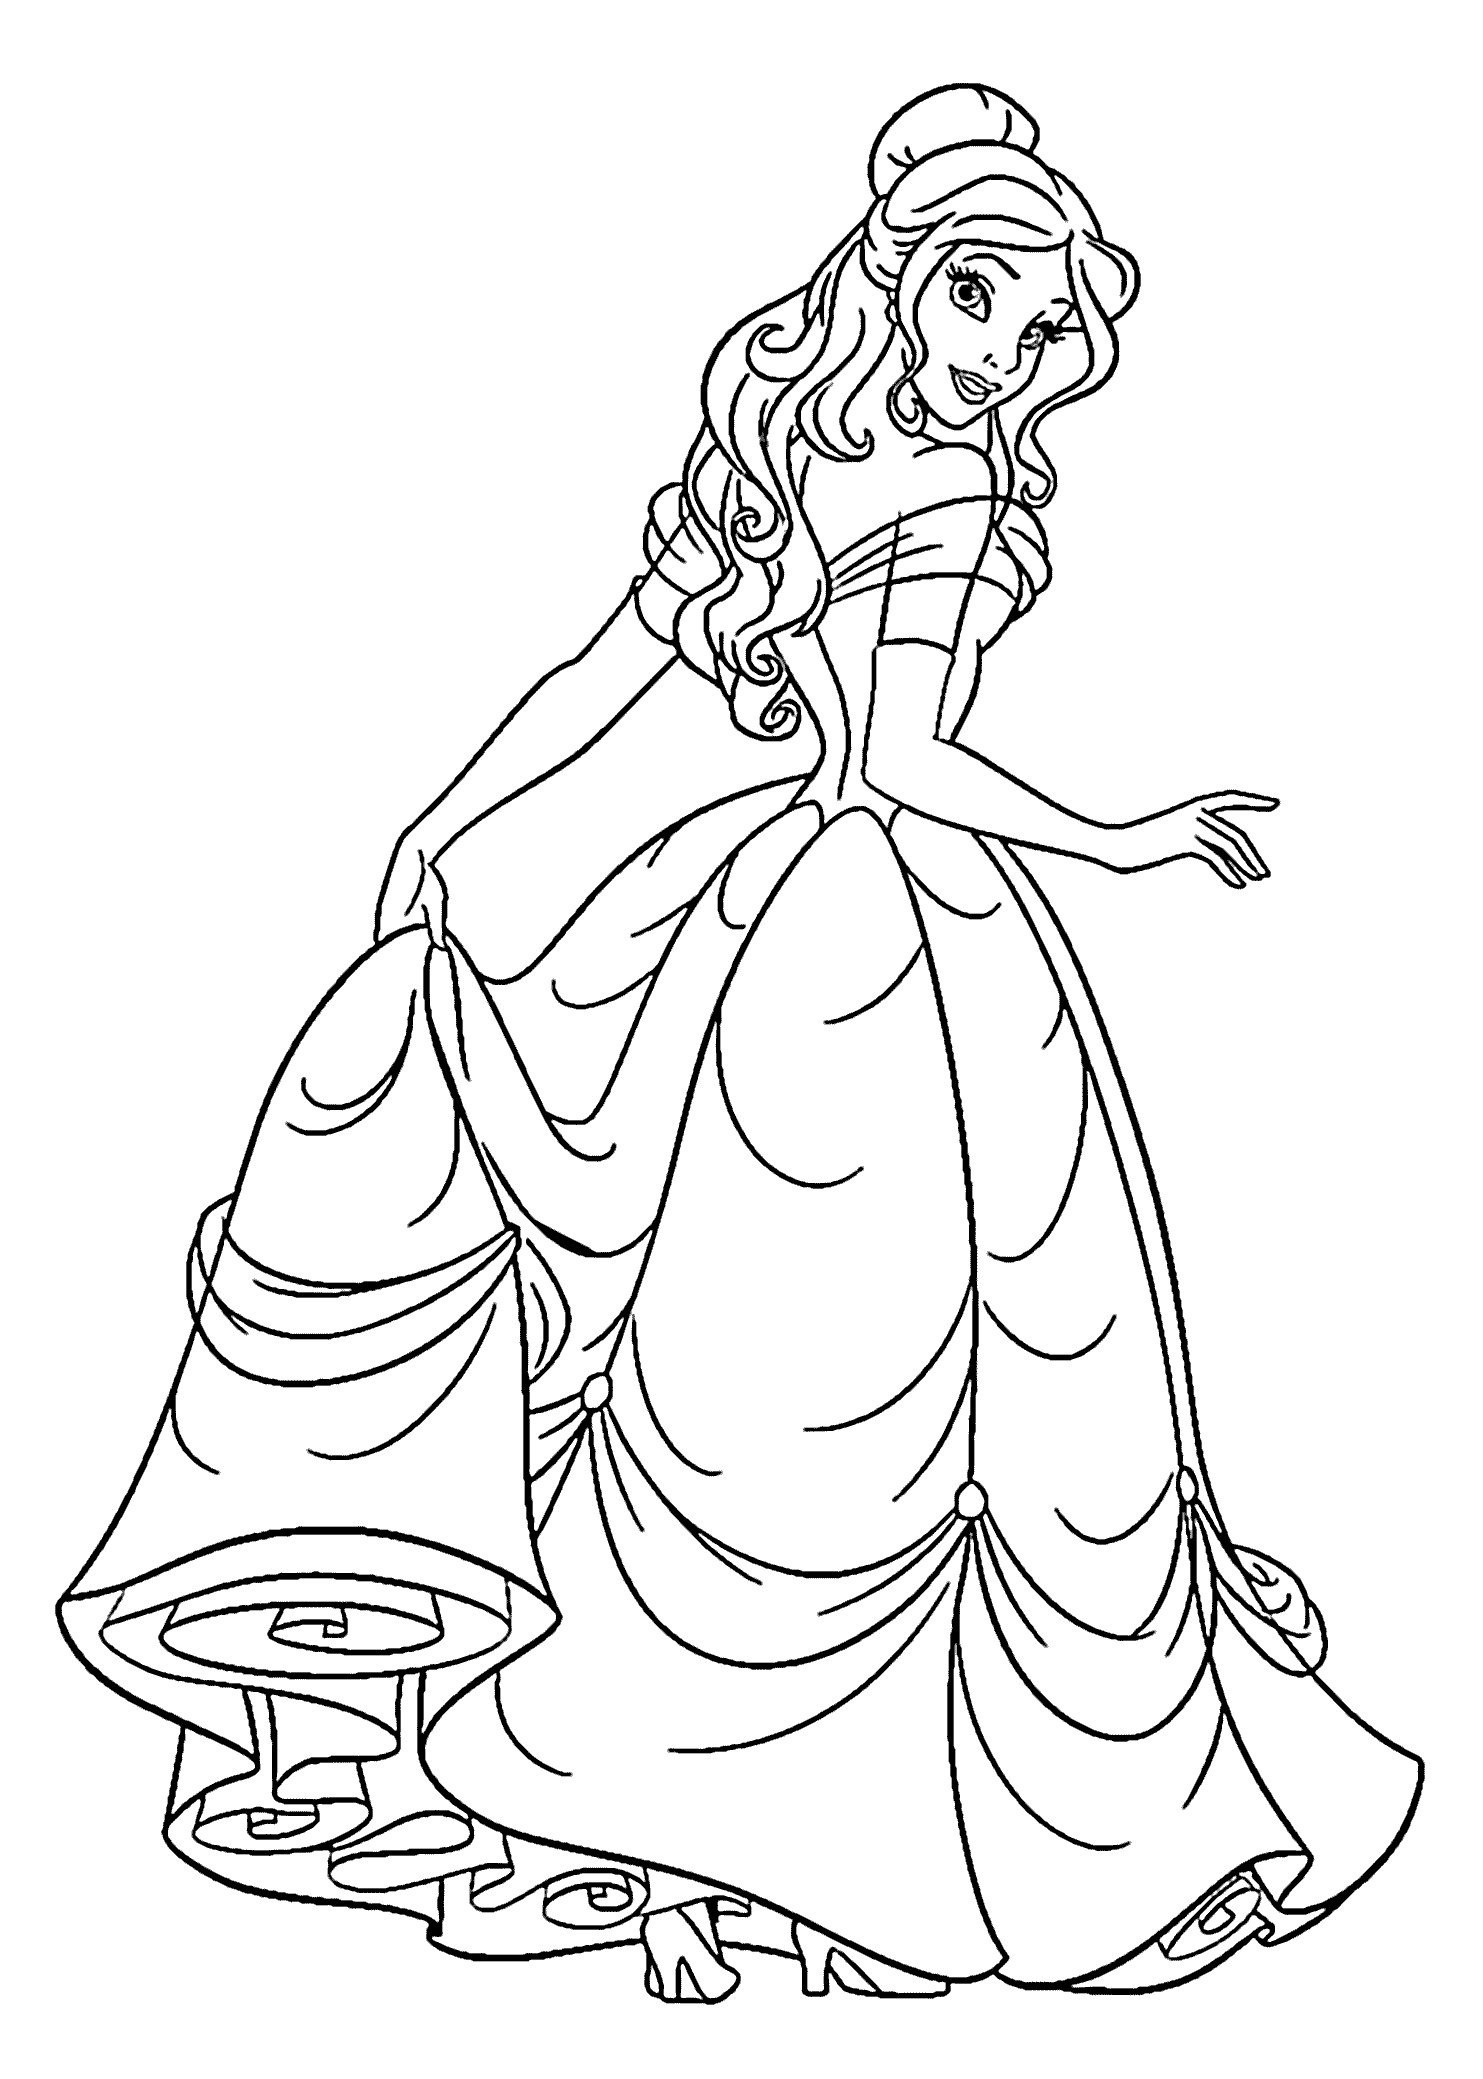 Coloring Pages For Girls Mouted Princess
 Beauty princess coloring pages for kids printable free